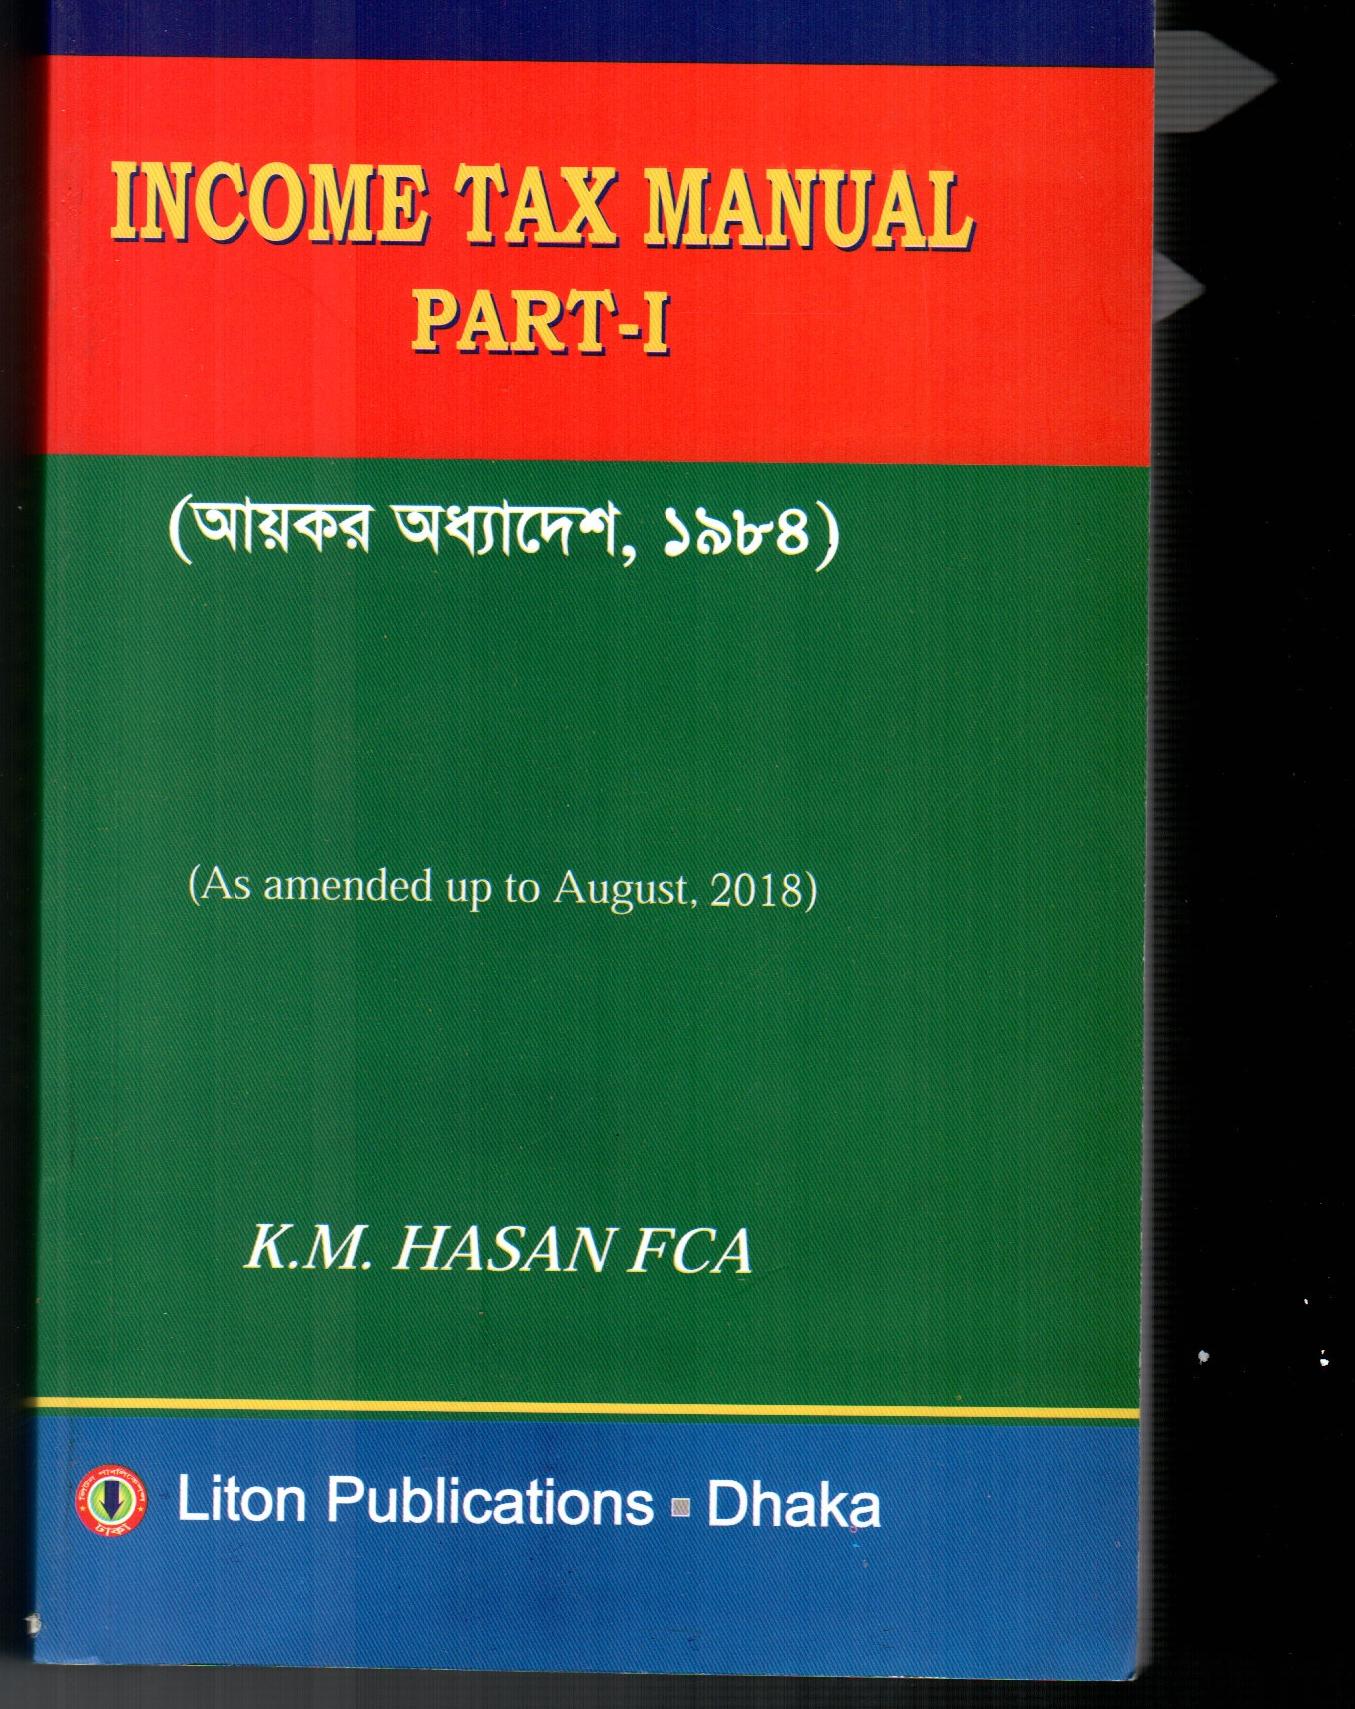 INCOME TAX MANUAL PART-1